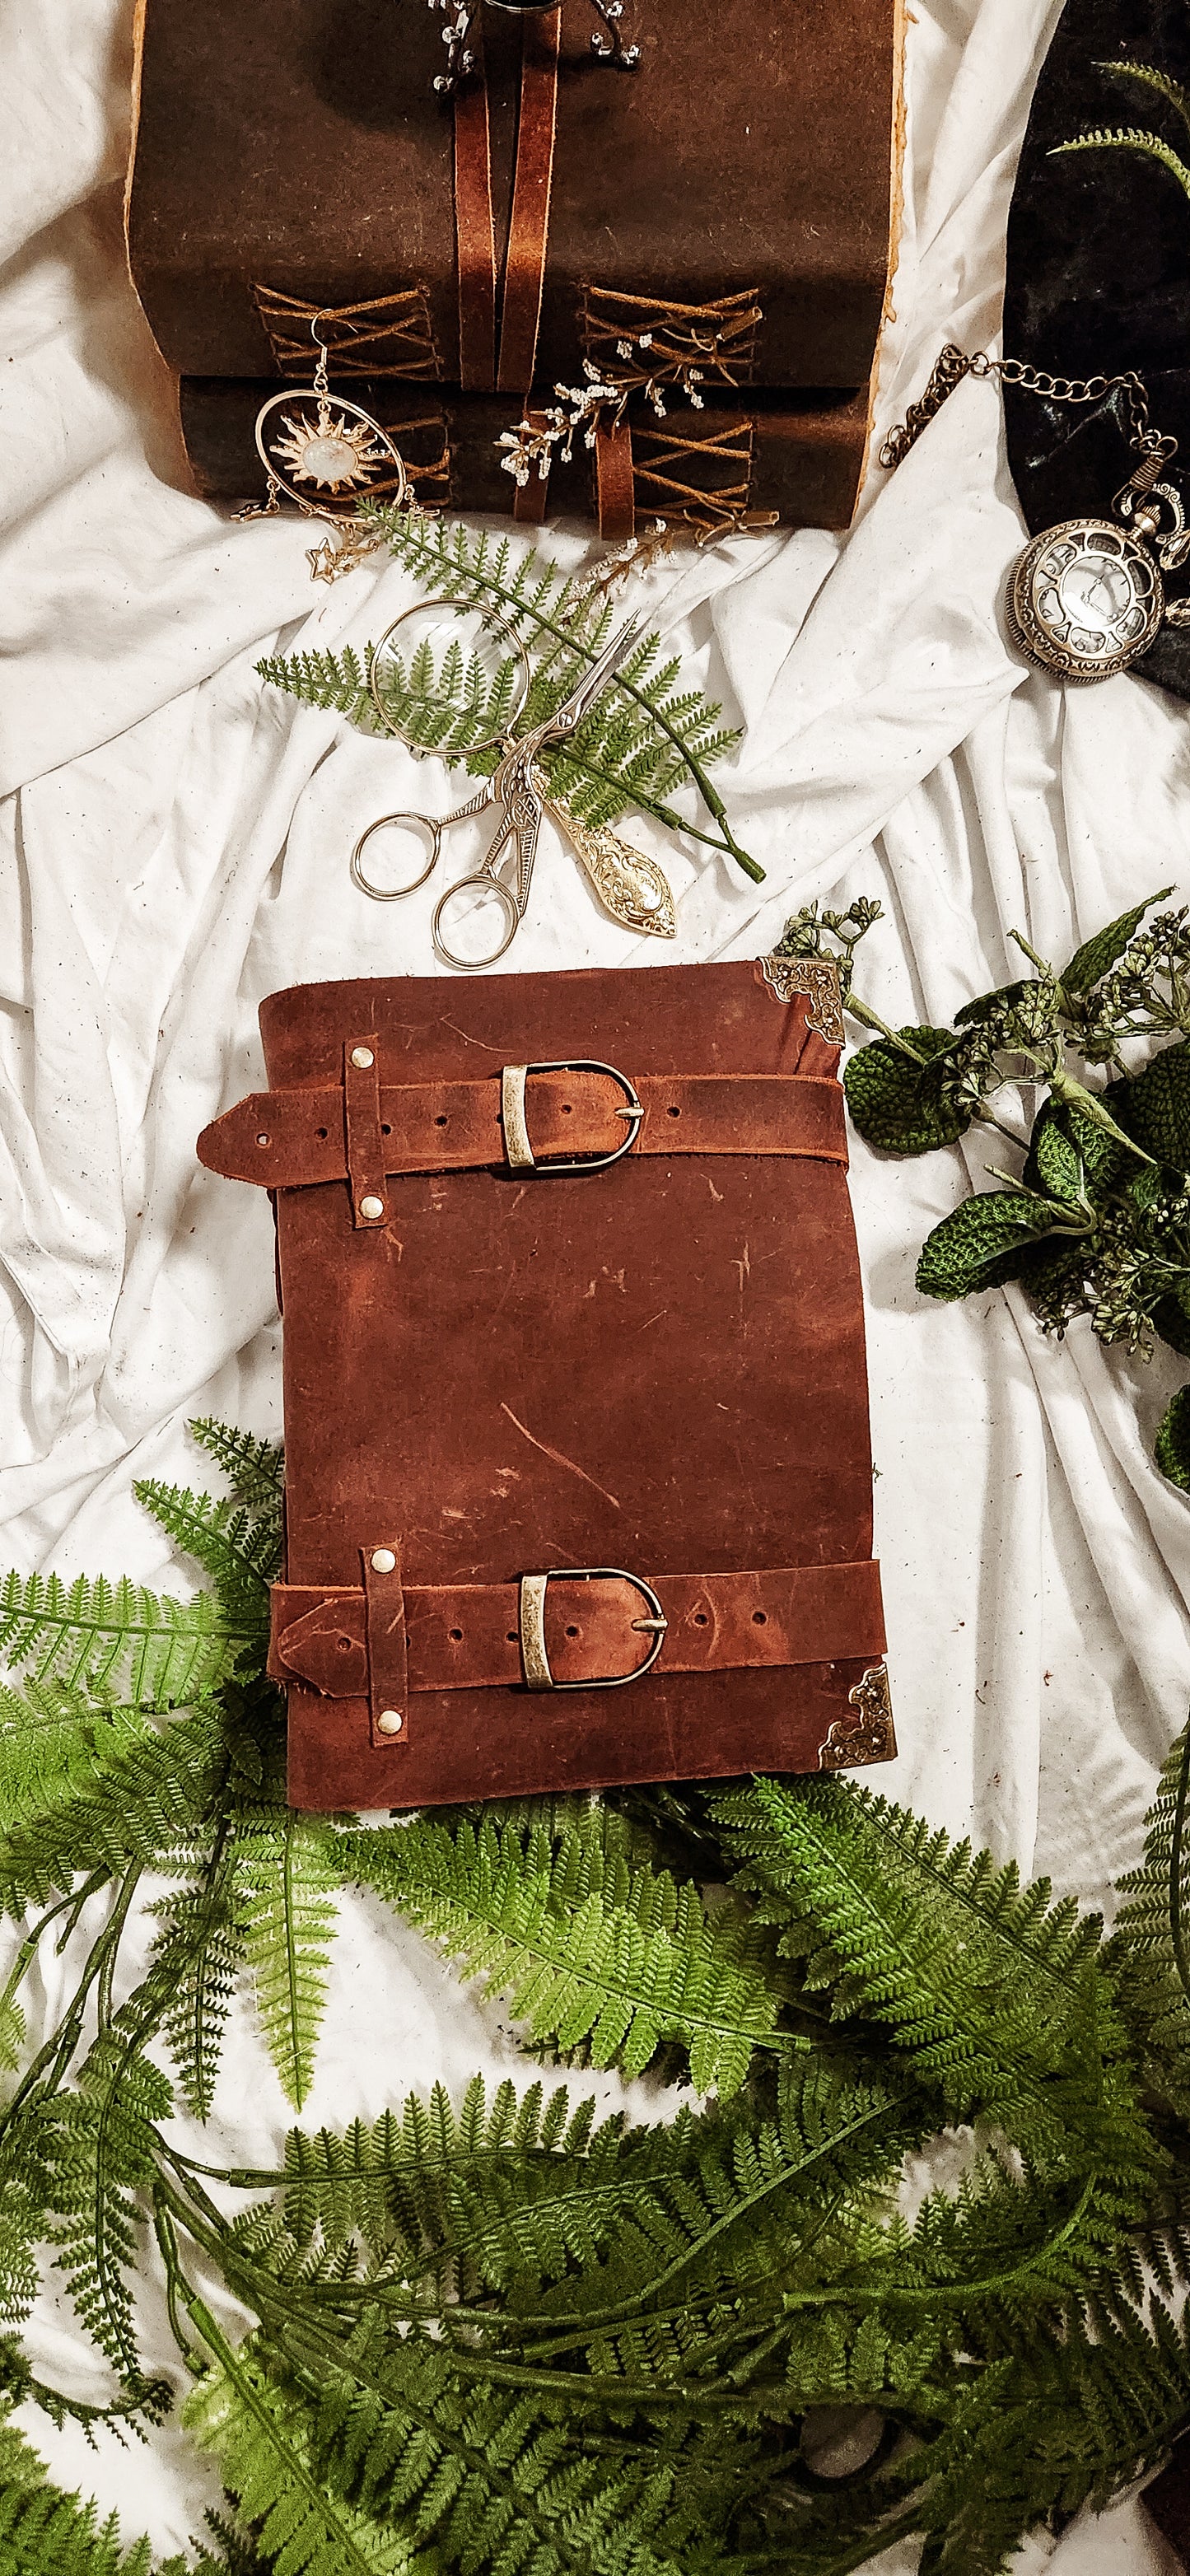 Medieval leather journal